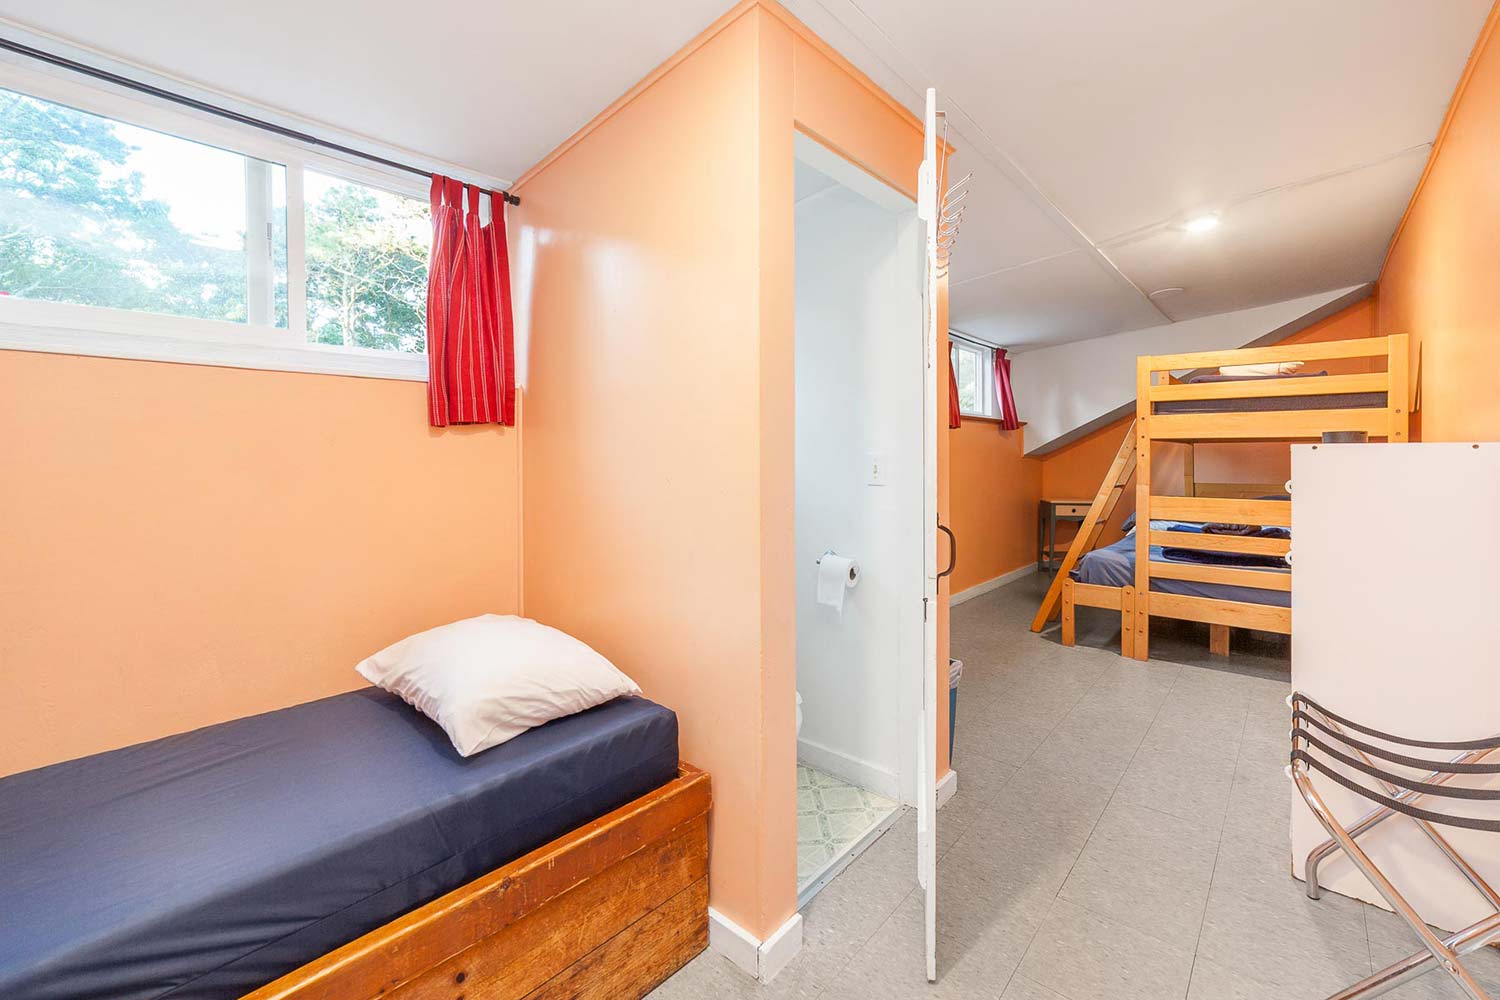 a private room at HI Martha's Vineyard hostel with one twin-sized bed, one twin-sized bed bunked over one full-sized bed, a luggage rack, and an ensuite half-bath